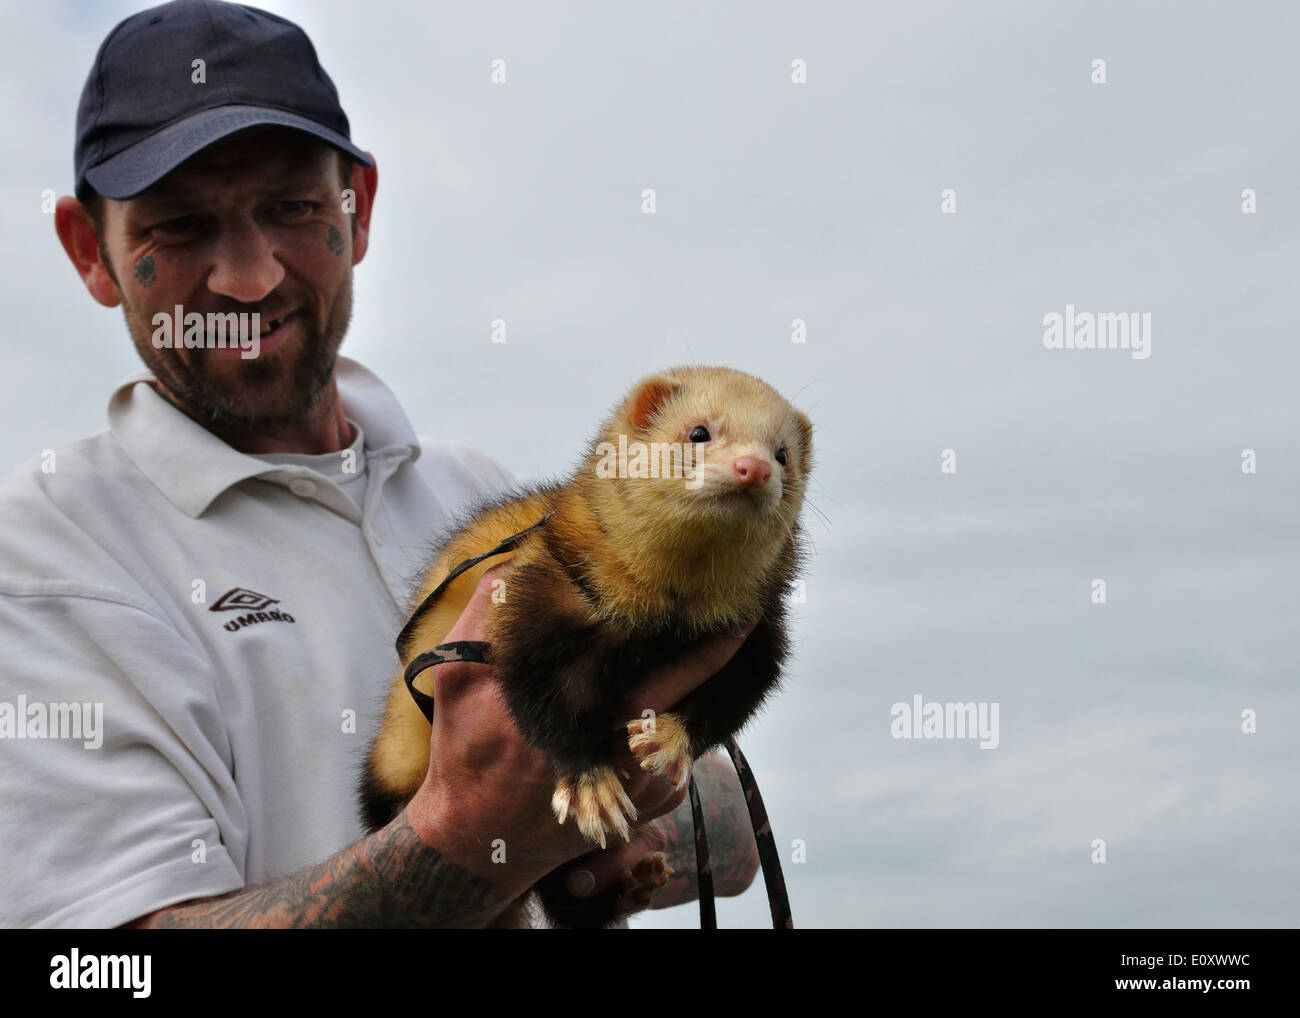 British man with tattoos on his face and arms,wearing a peak cap,holding his pet ferret.Lawford,Essex,UK Stock Photo